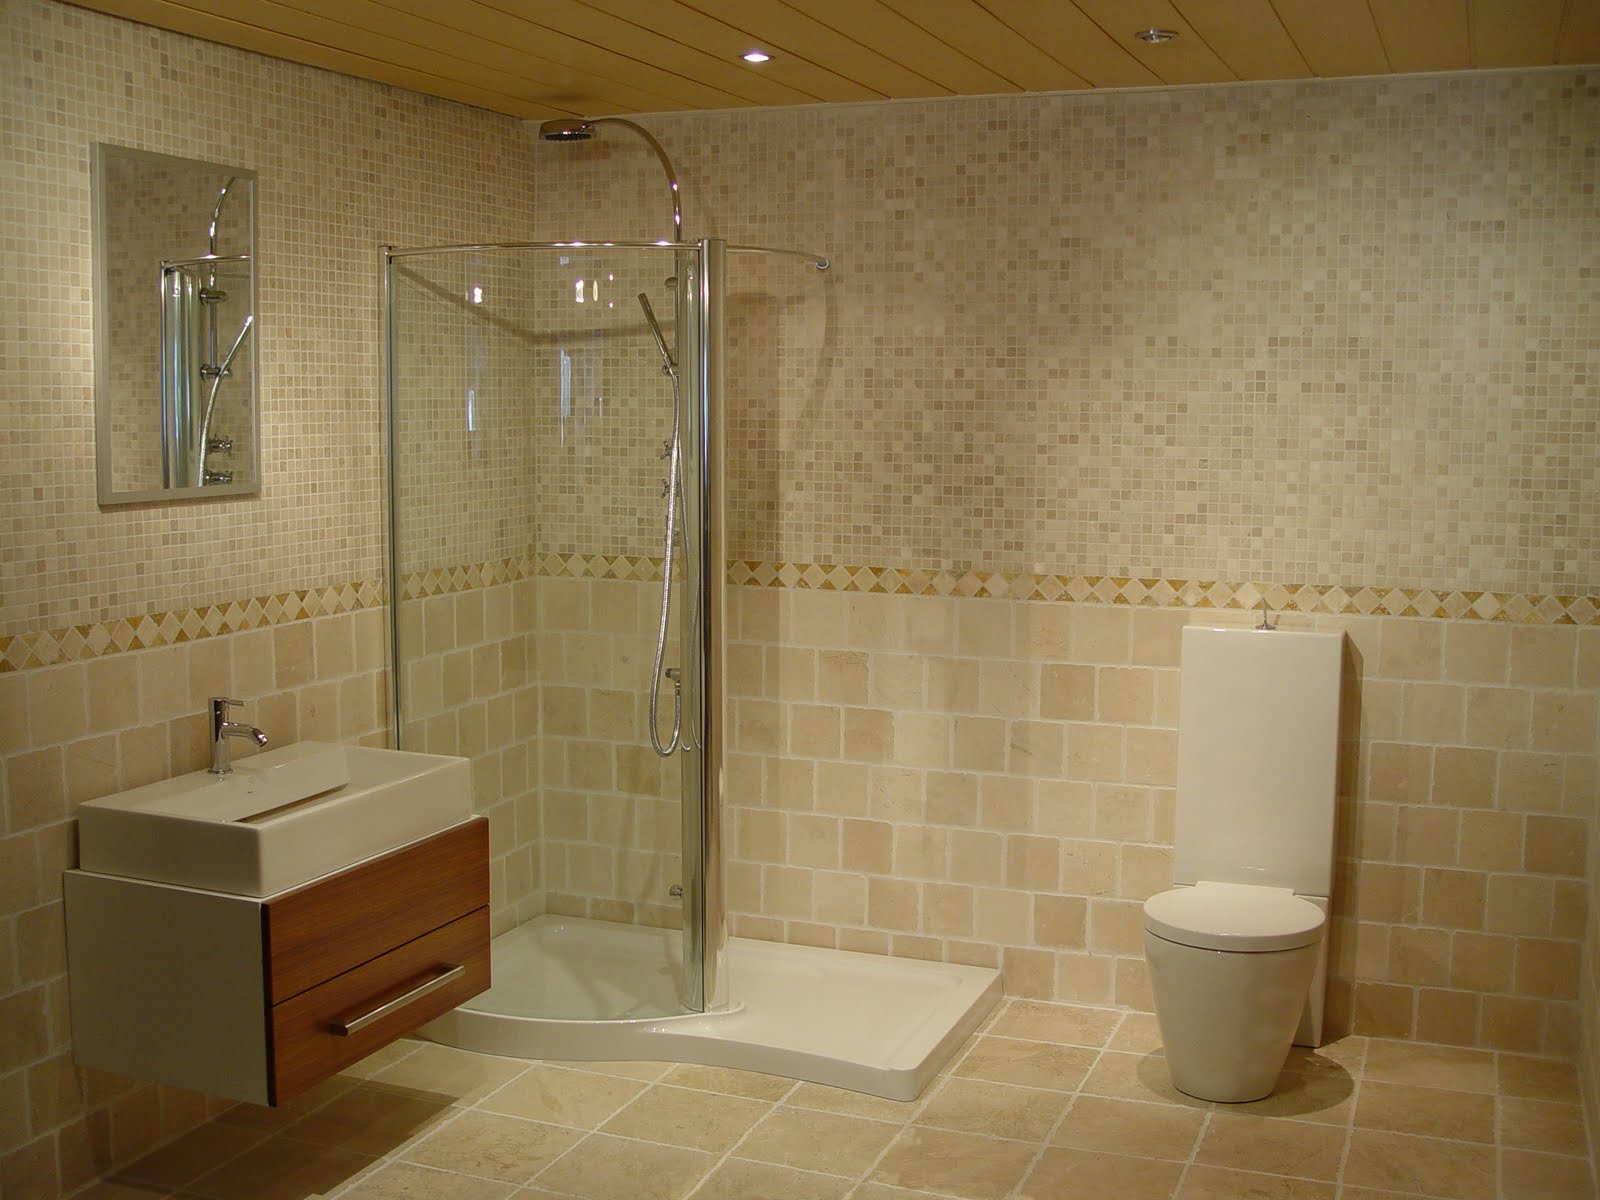 A bathroom which shines with a lovely clean glass shower screen